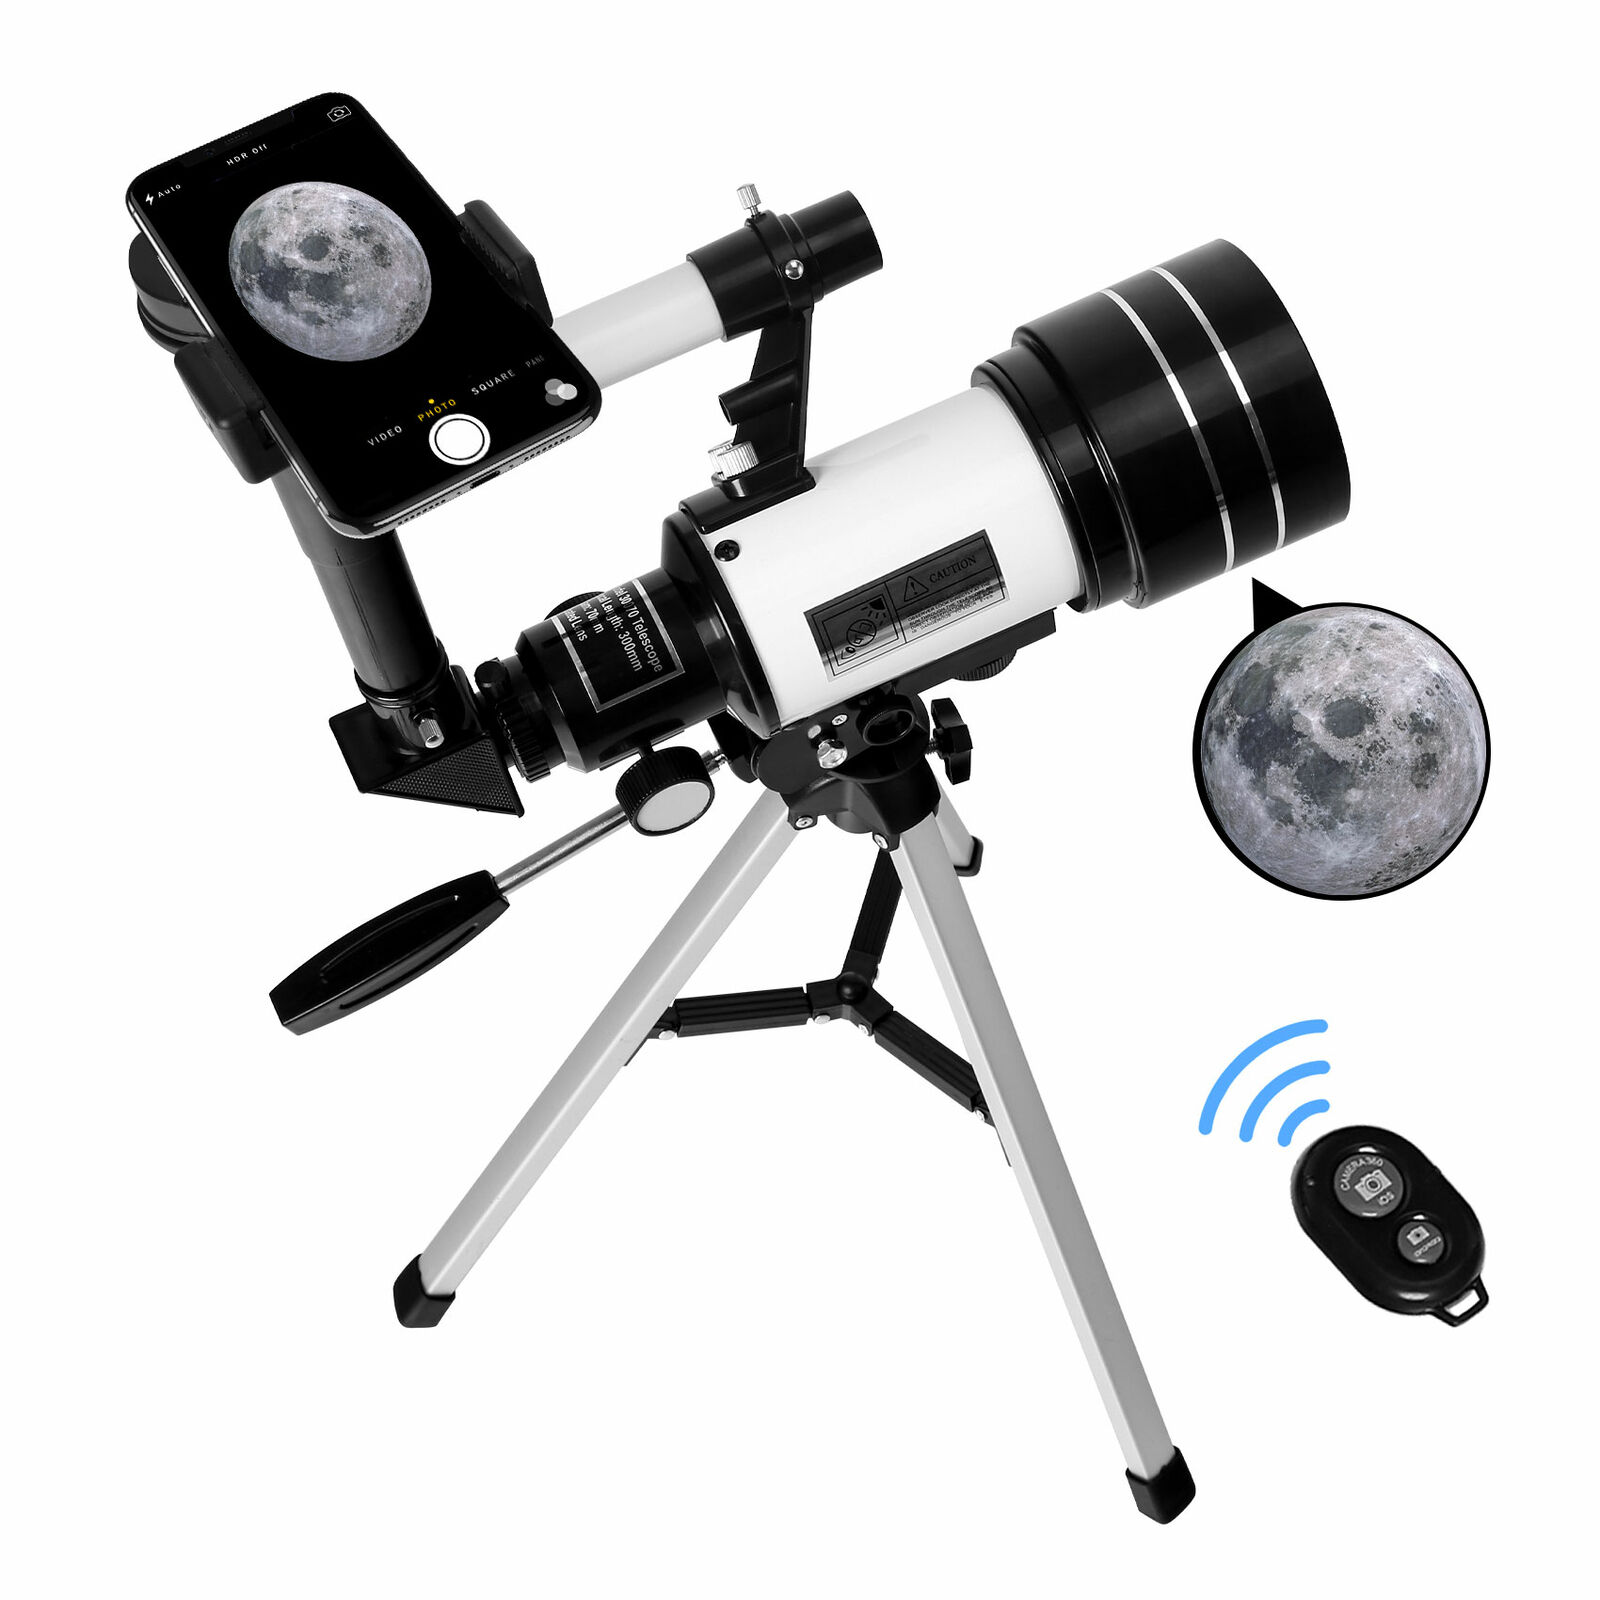 300mm Astronomical Telescope 150X with Phone Adapter Barlow Lens for Kids Gift